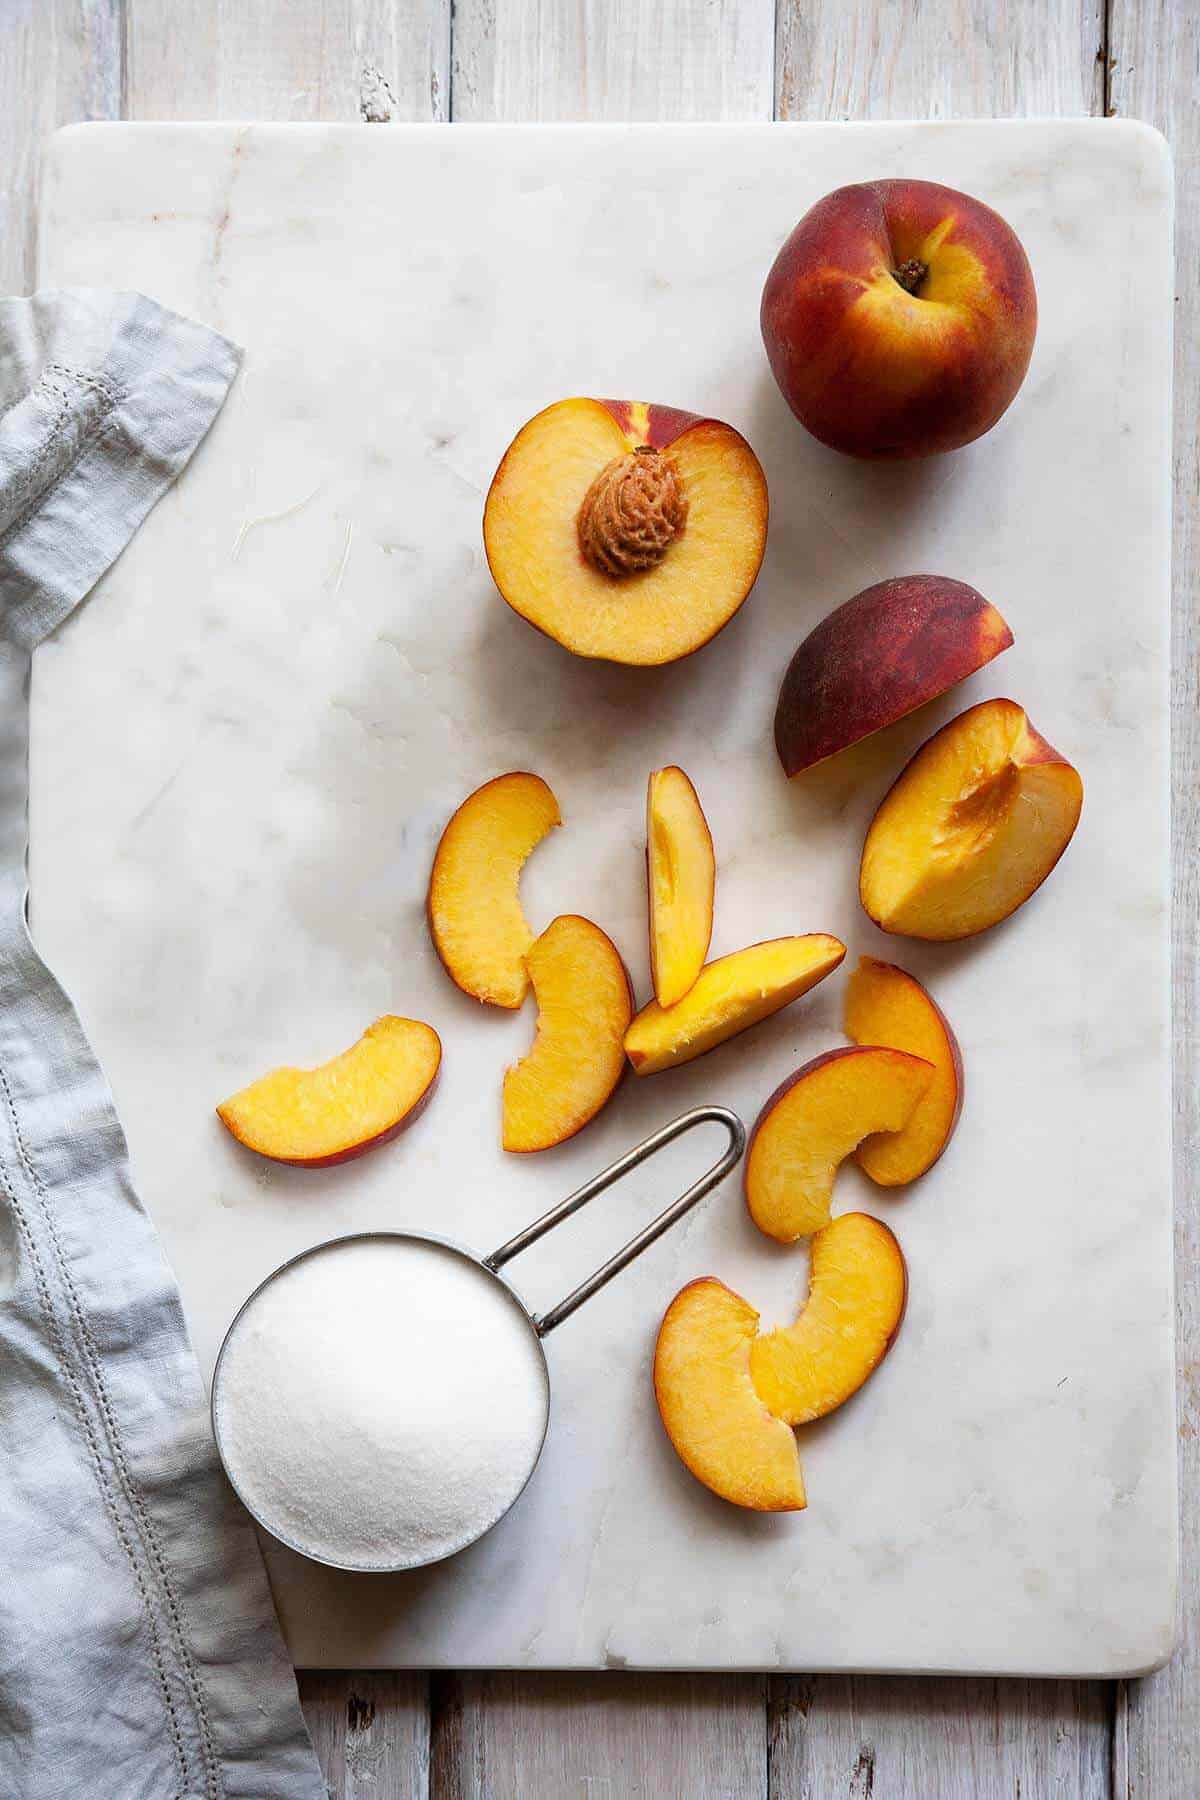 peach syrup ingredients: sliced peaches and sugar